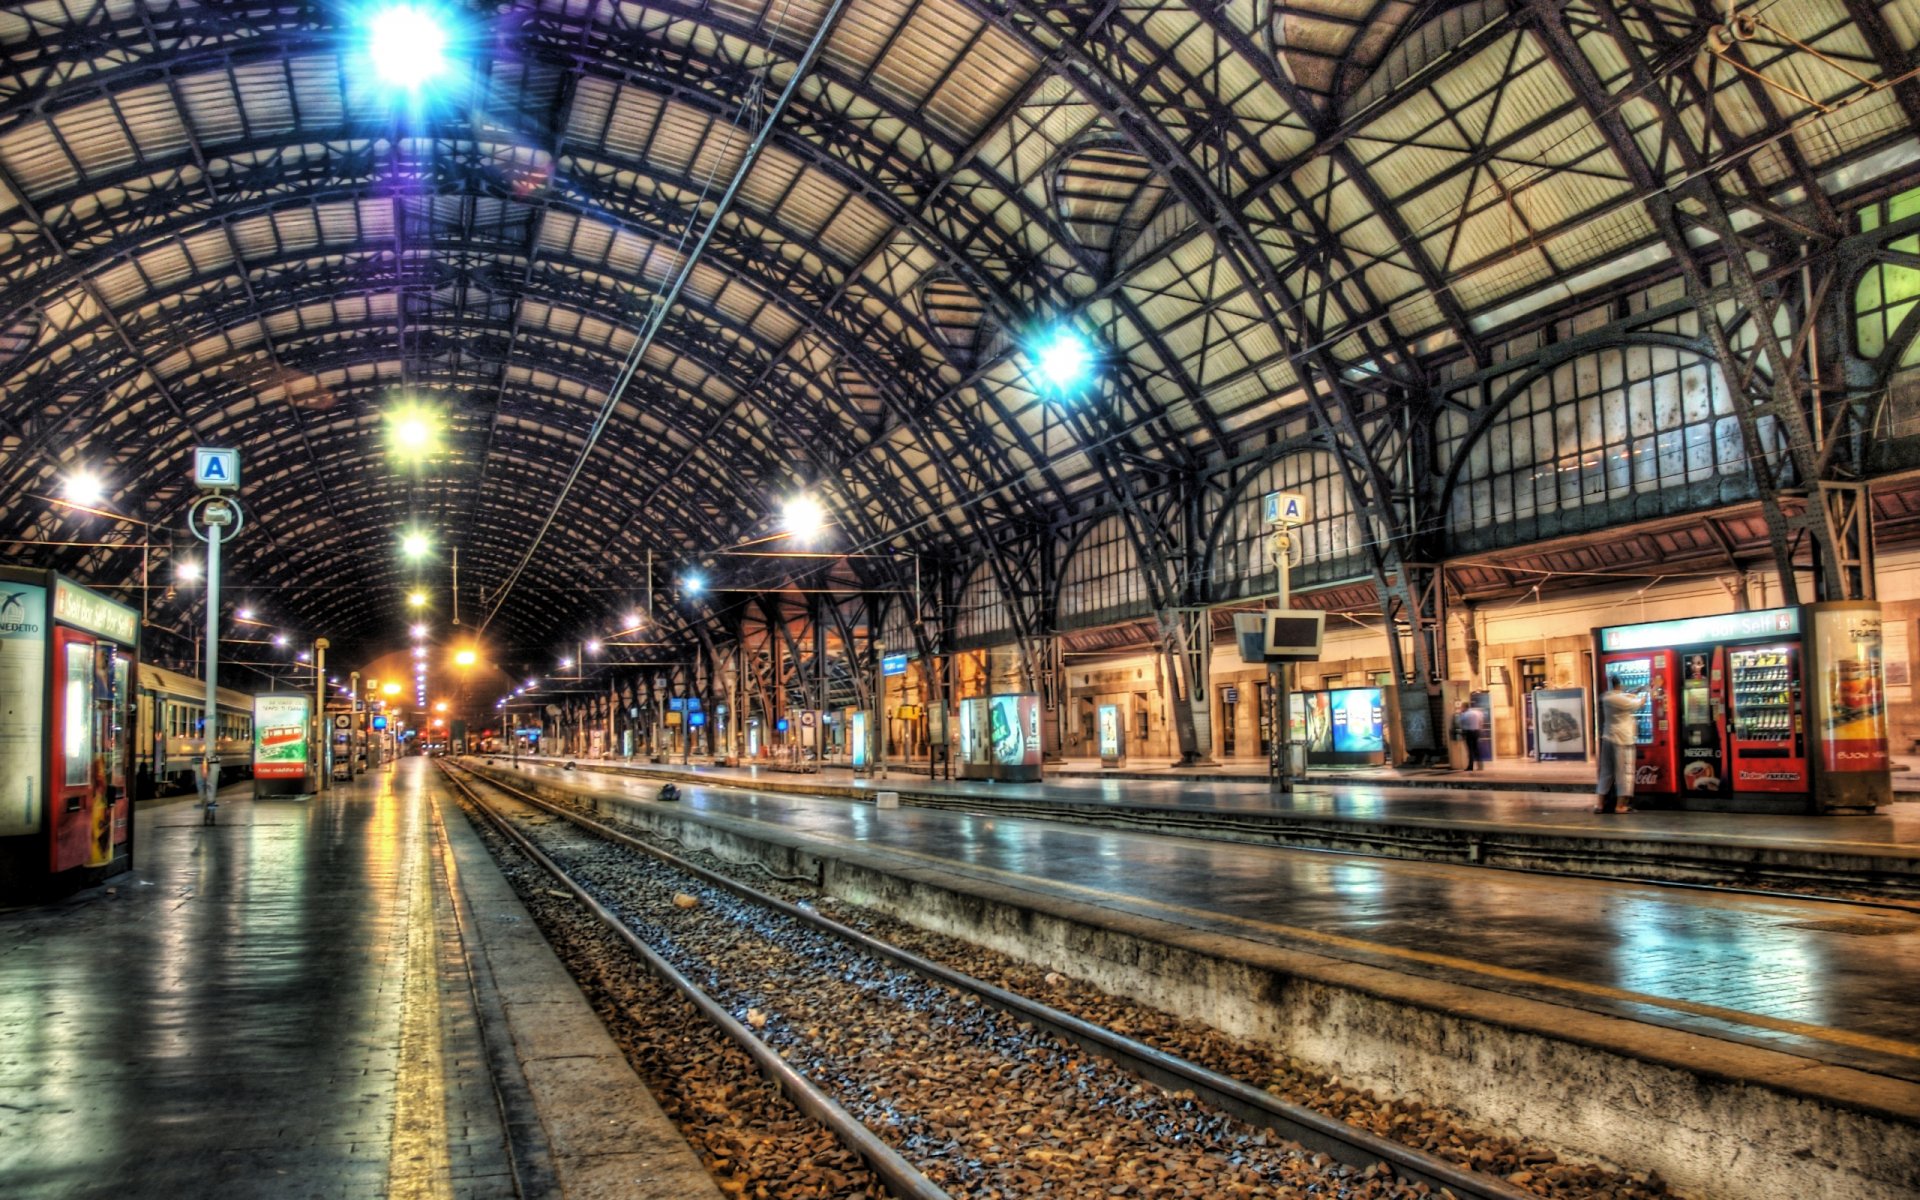 748+ Thousand City Train Royalty-Free Images, Stock Photos